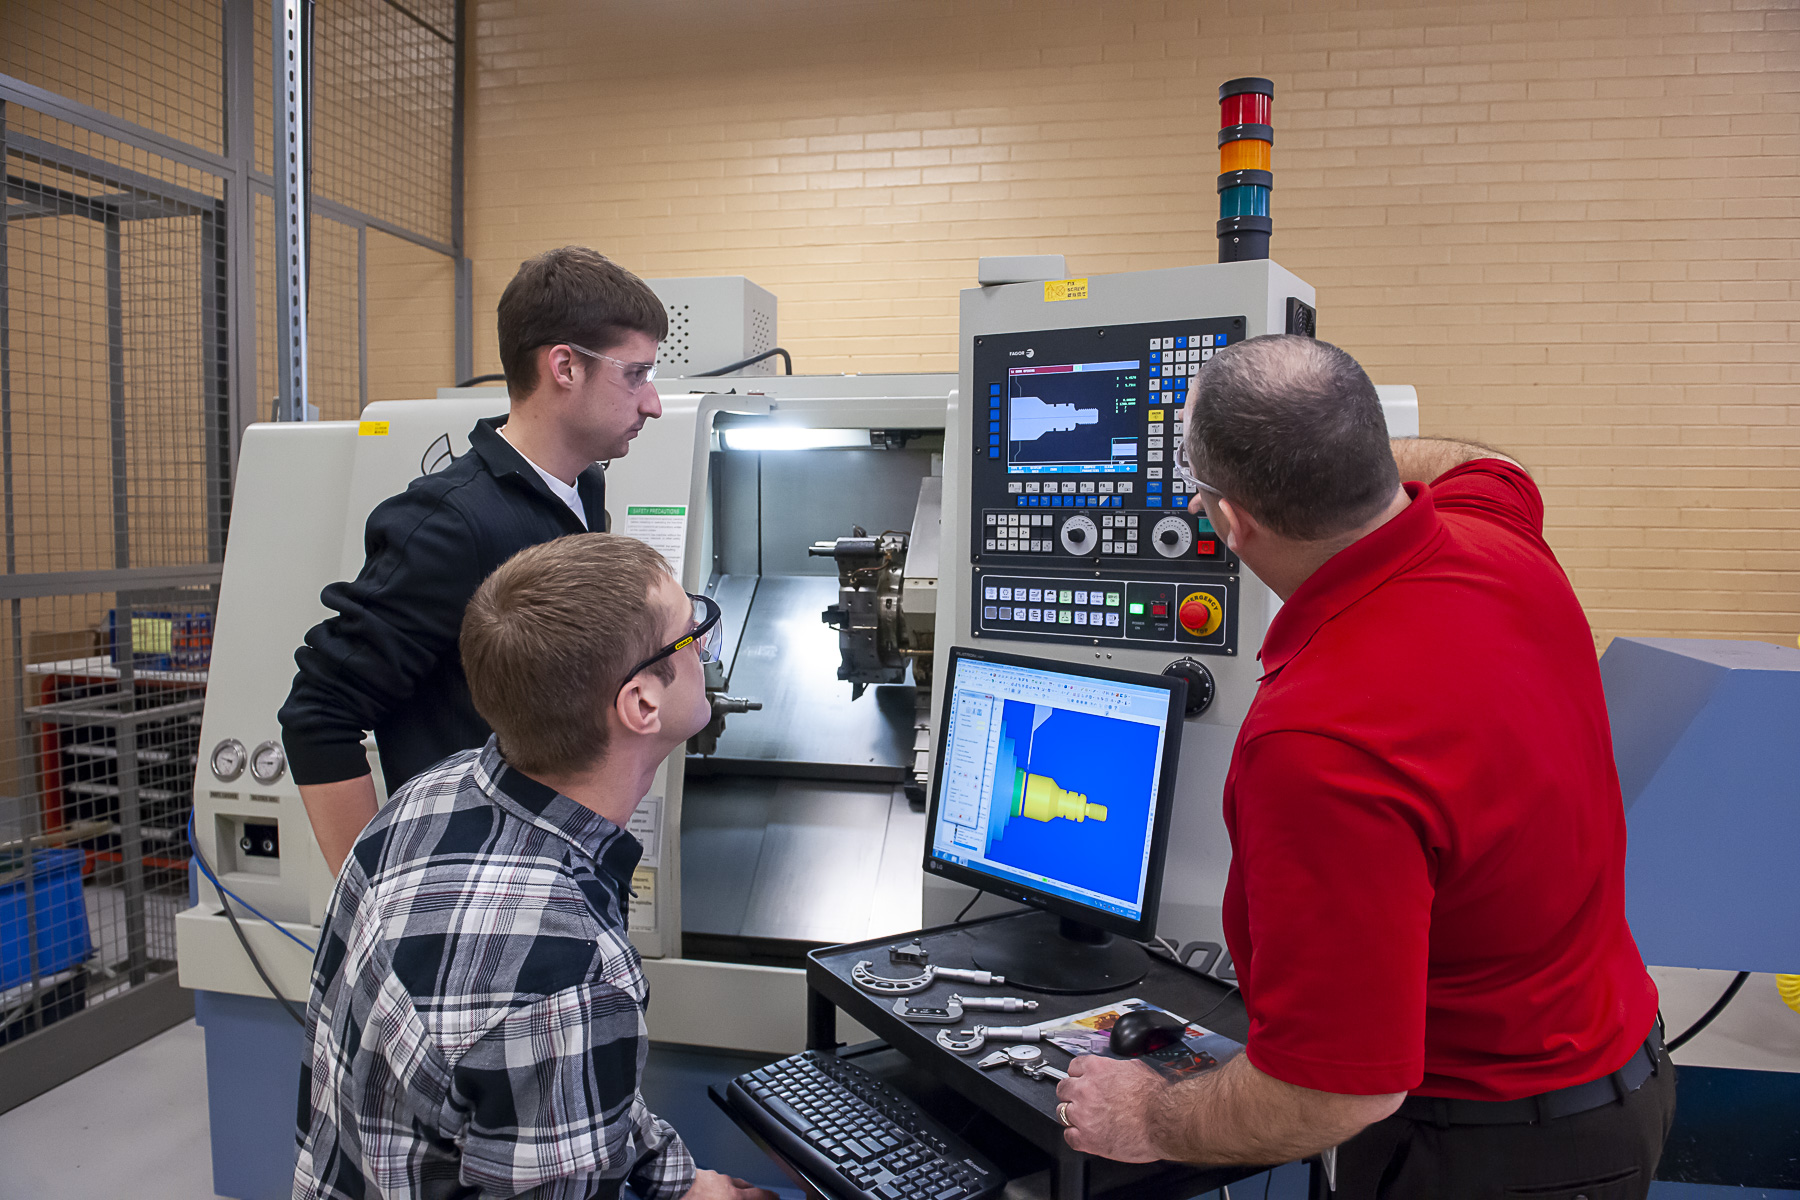 Faculty member educating students within the manufacturing engineering technology program 